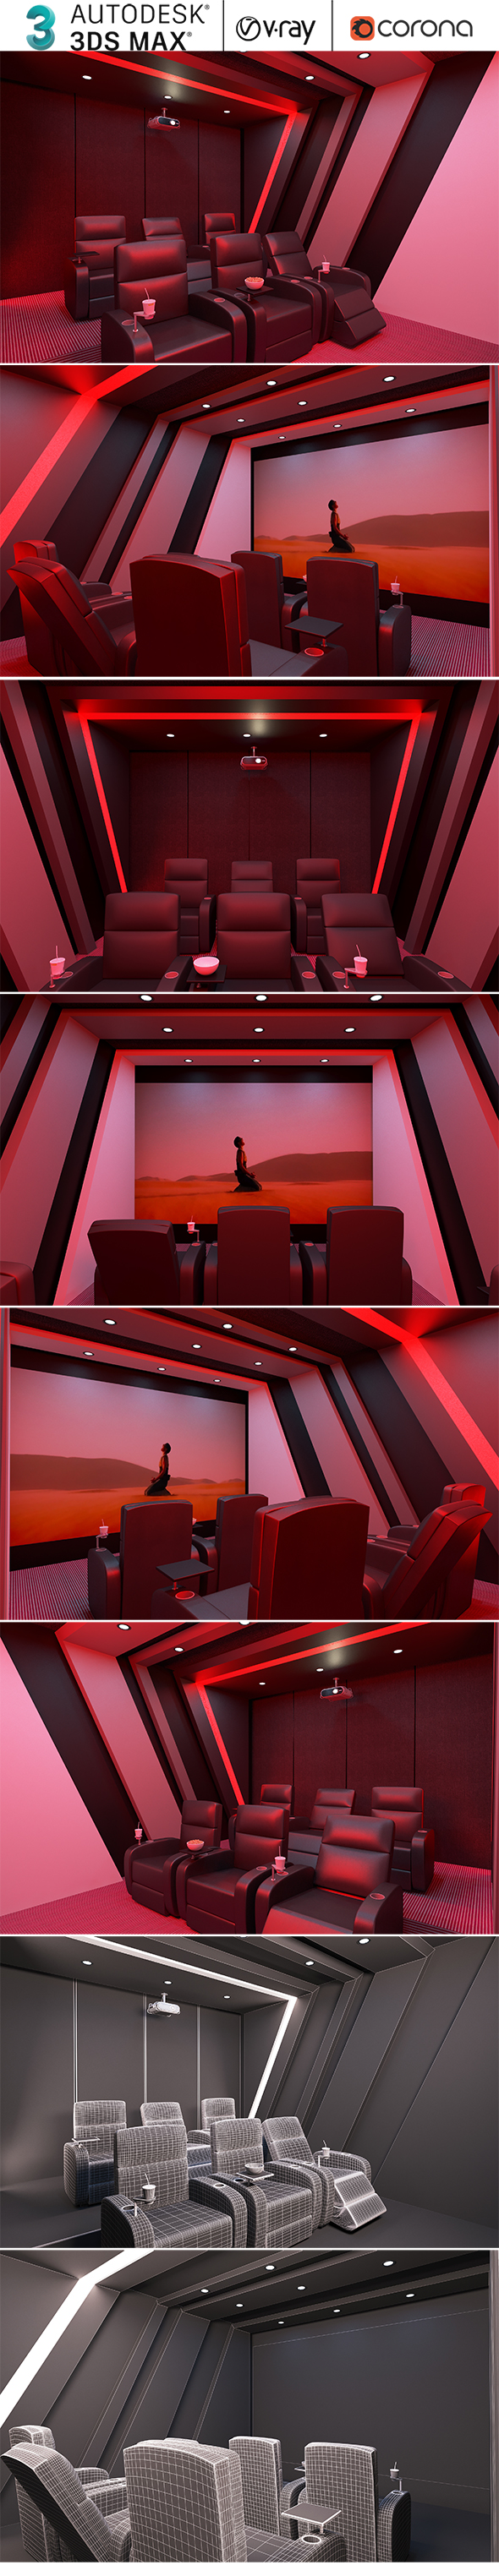 [DOWNLOAD]Home Cinema Design Collection 08